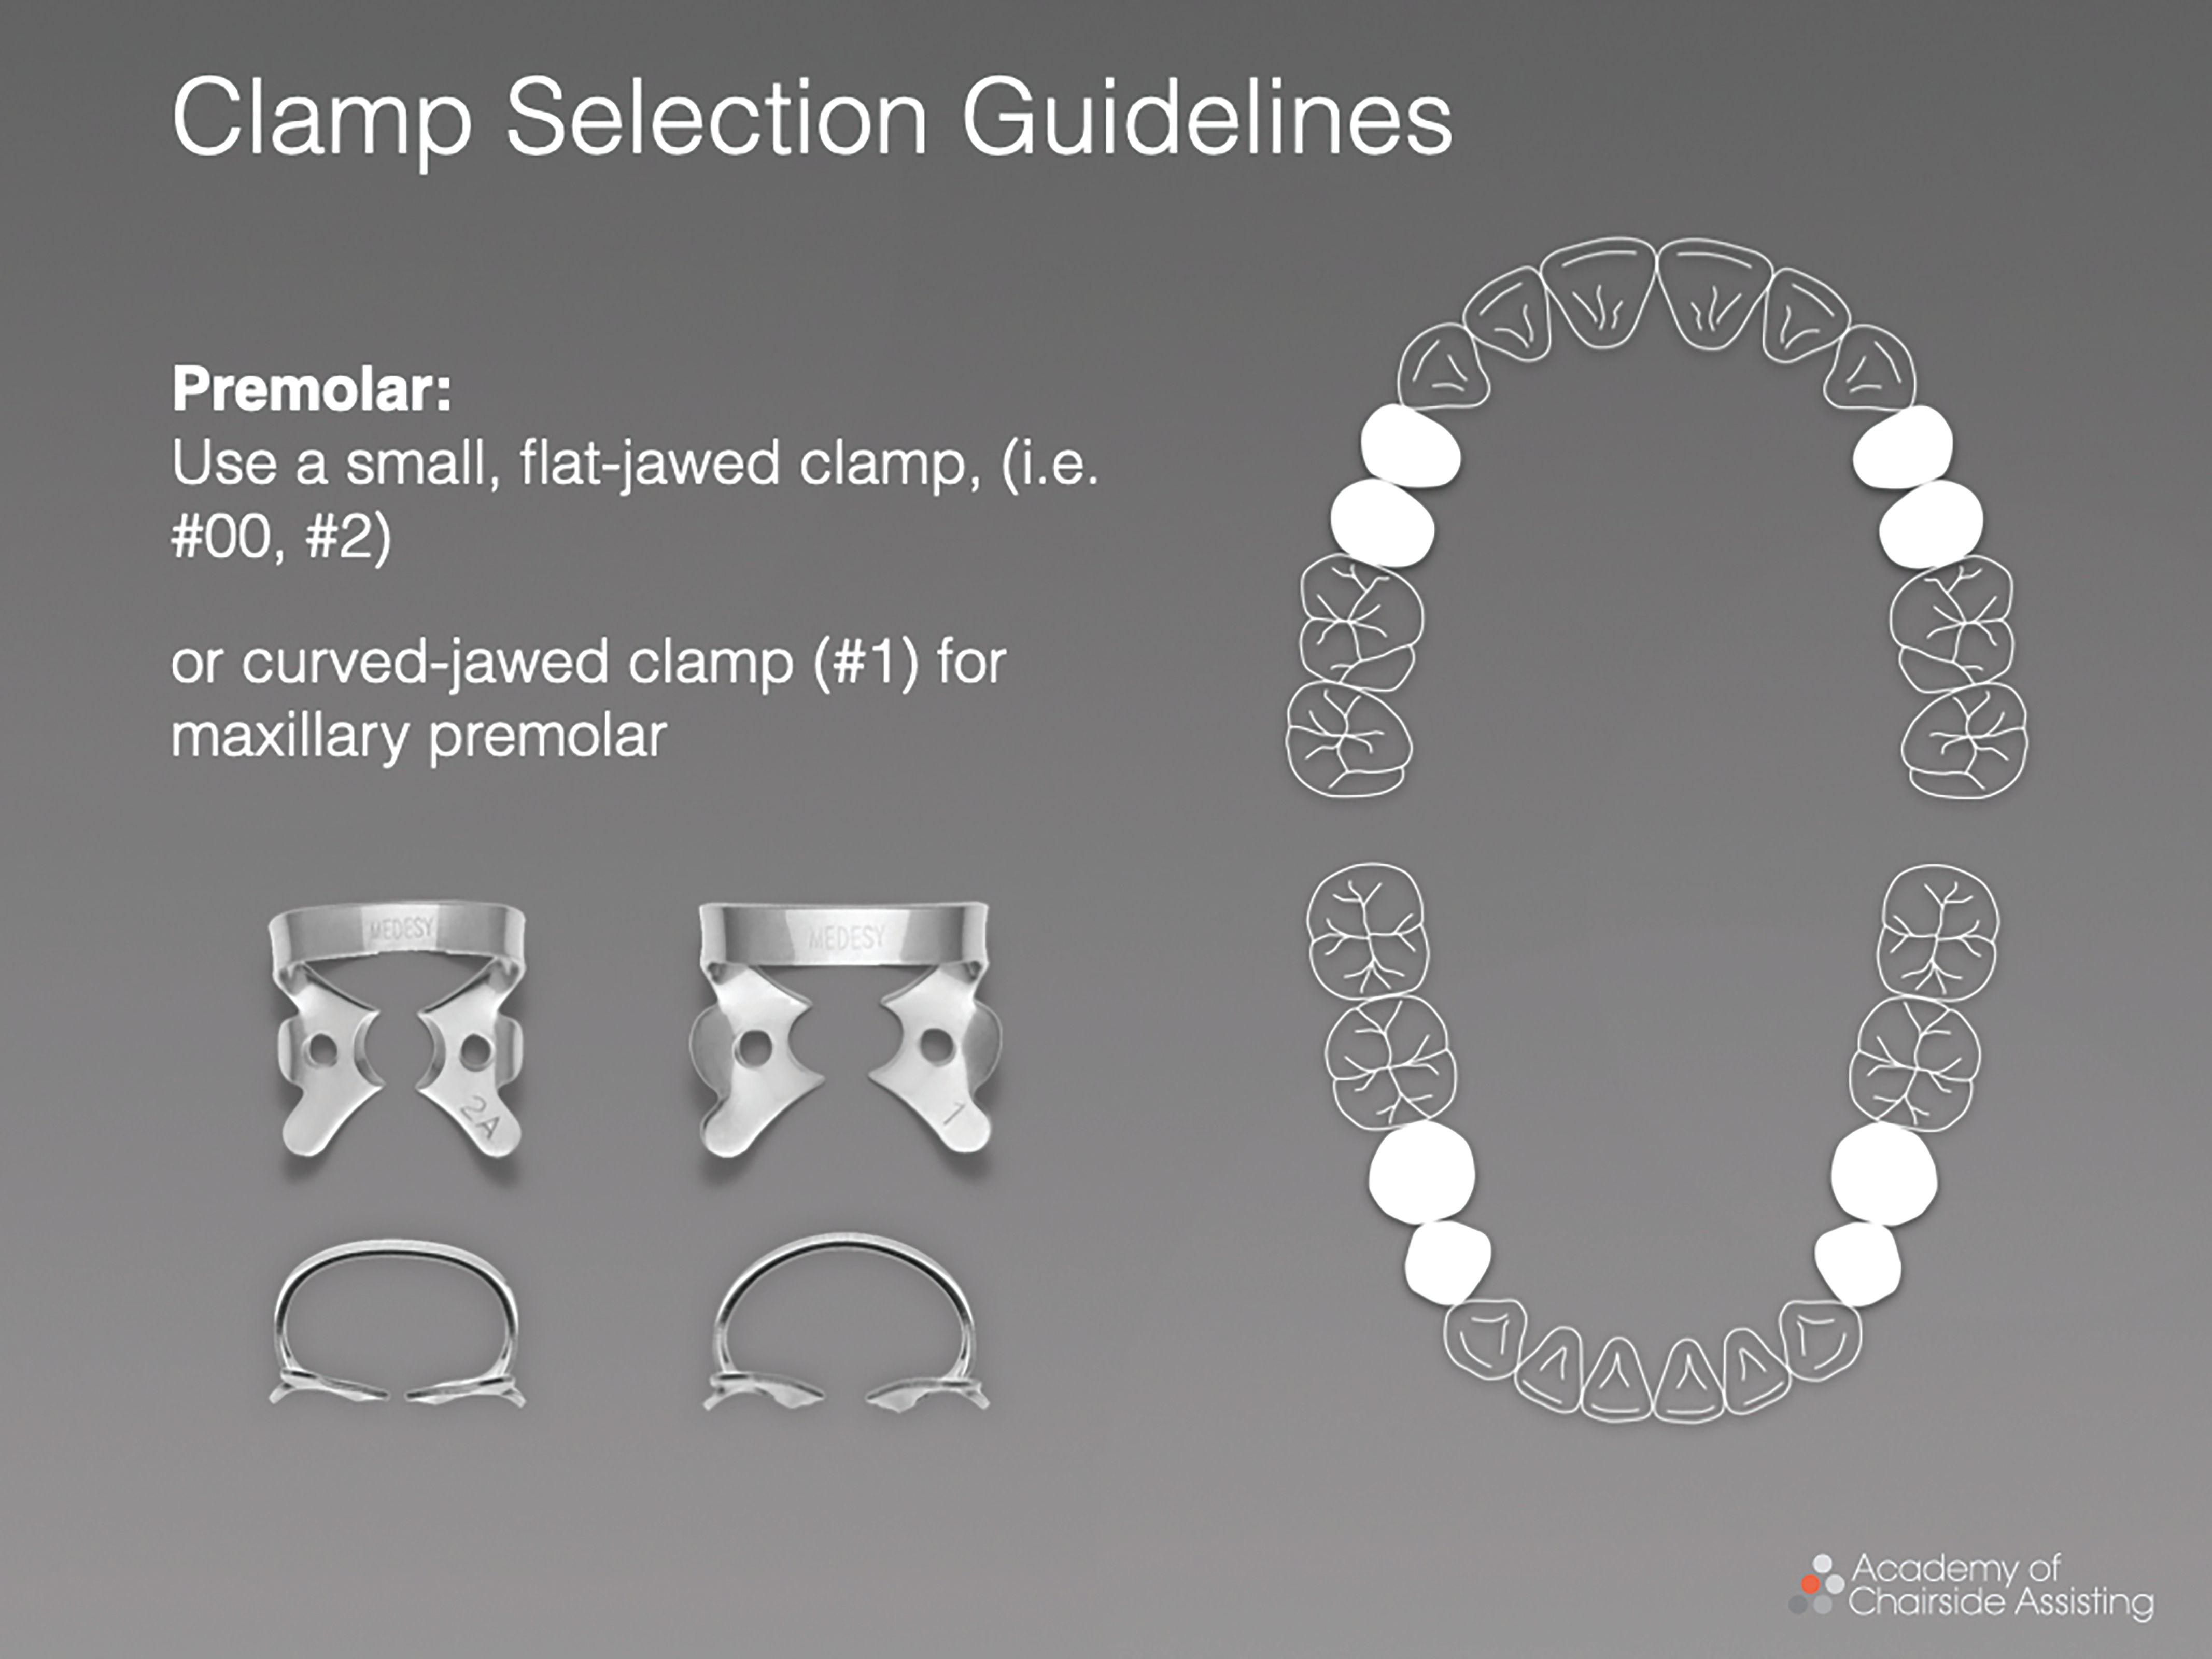 Figure 4. A flat-jawed clamp or curved-jaw clamp should be used on premolars.